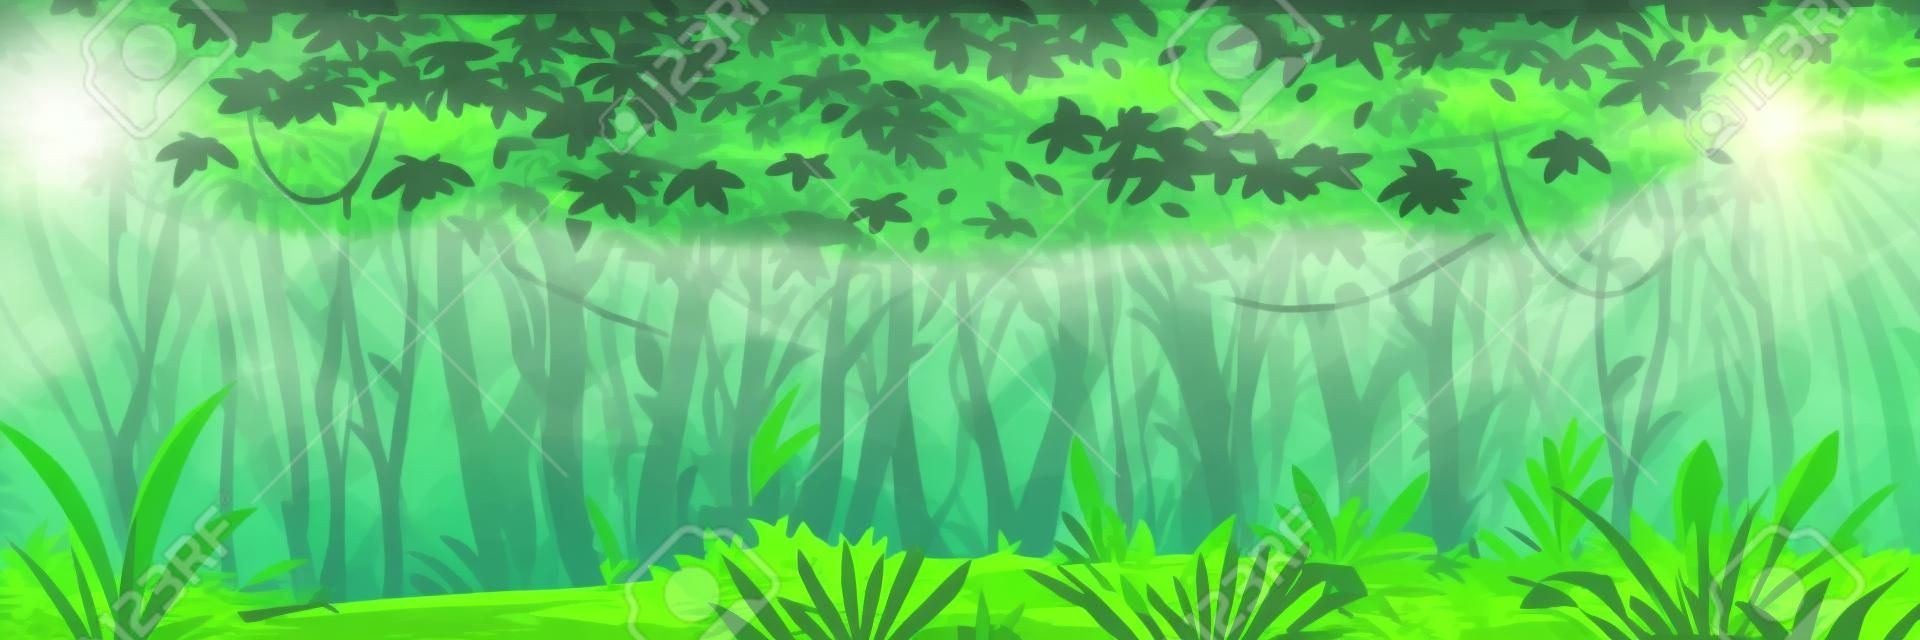 Wild wet dark jungle forest with trees, bushes and lianas, nature landscape with green jungle foliage and exotic plants growing on ground, horizontal banner with tropical plants on sunny day